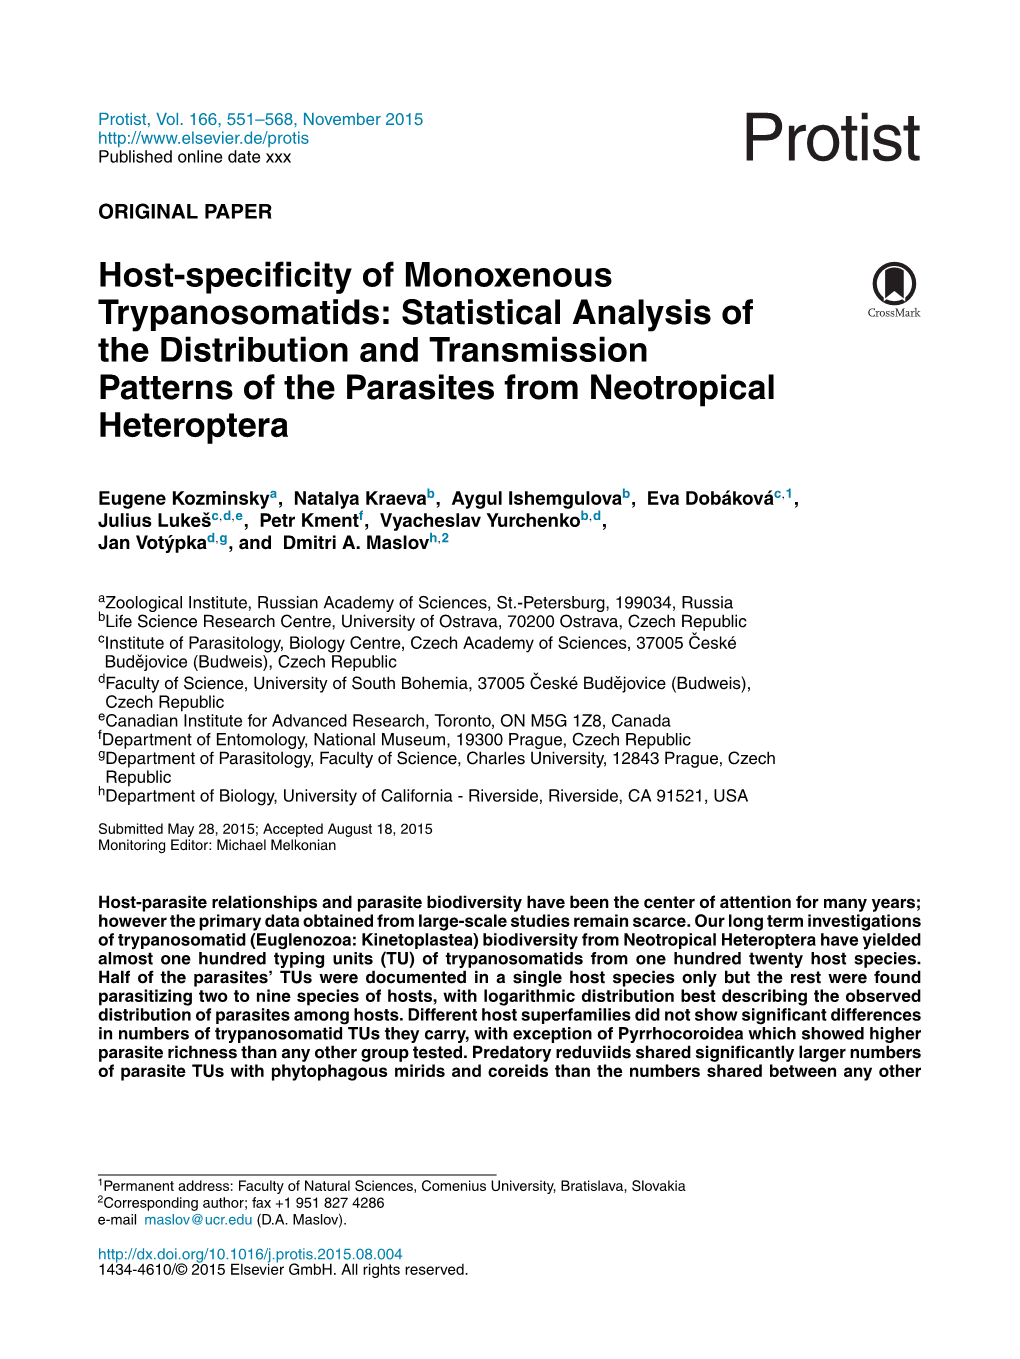 Host-Specificity of Monoxenous Trypanosomatids: Statistical